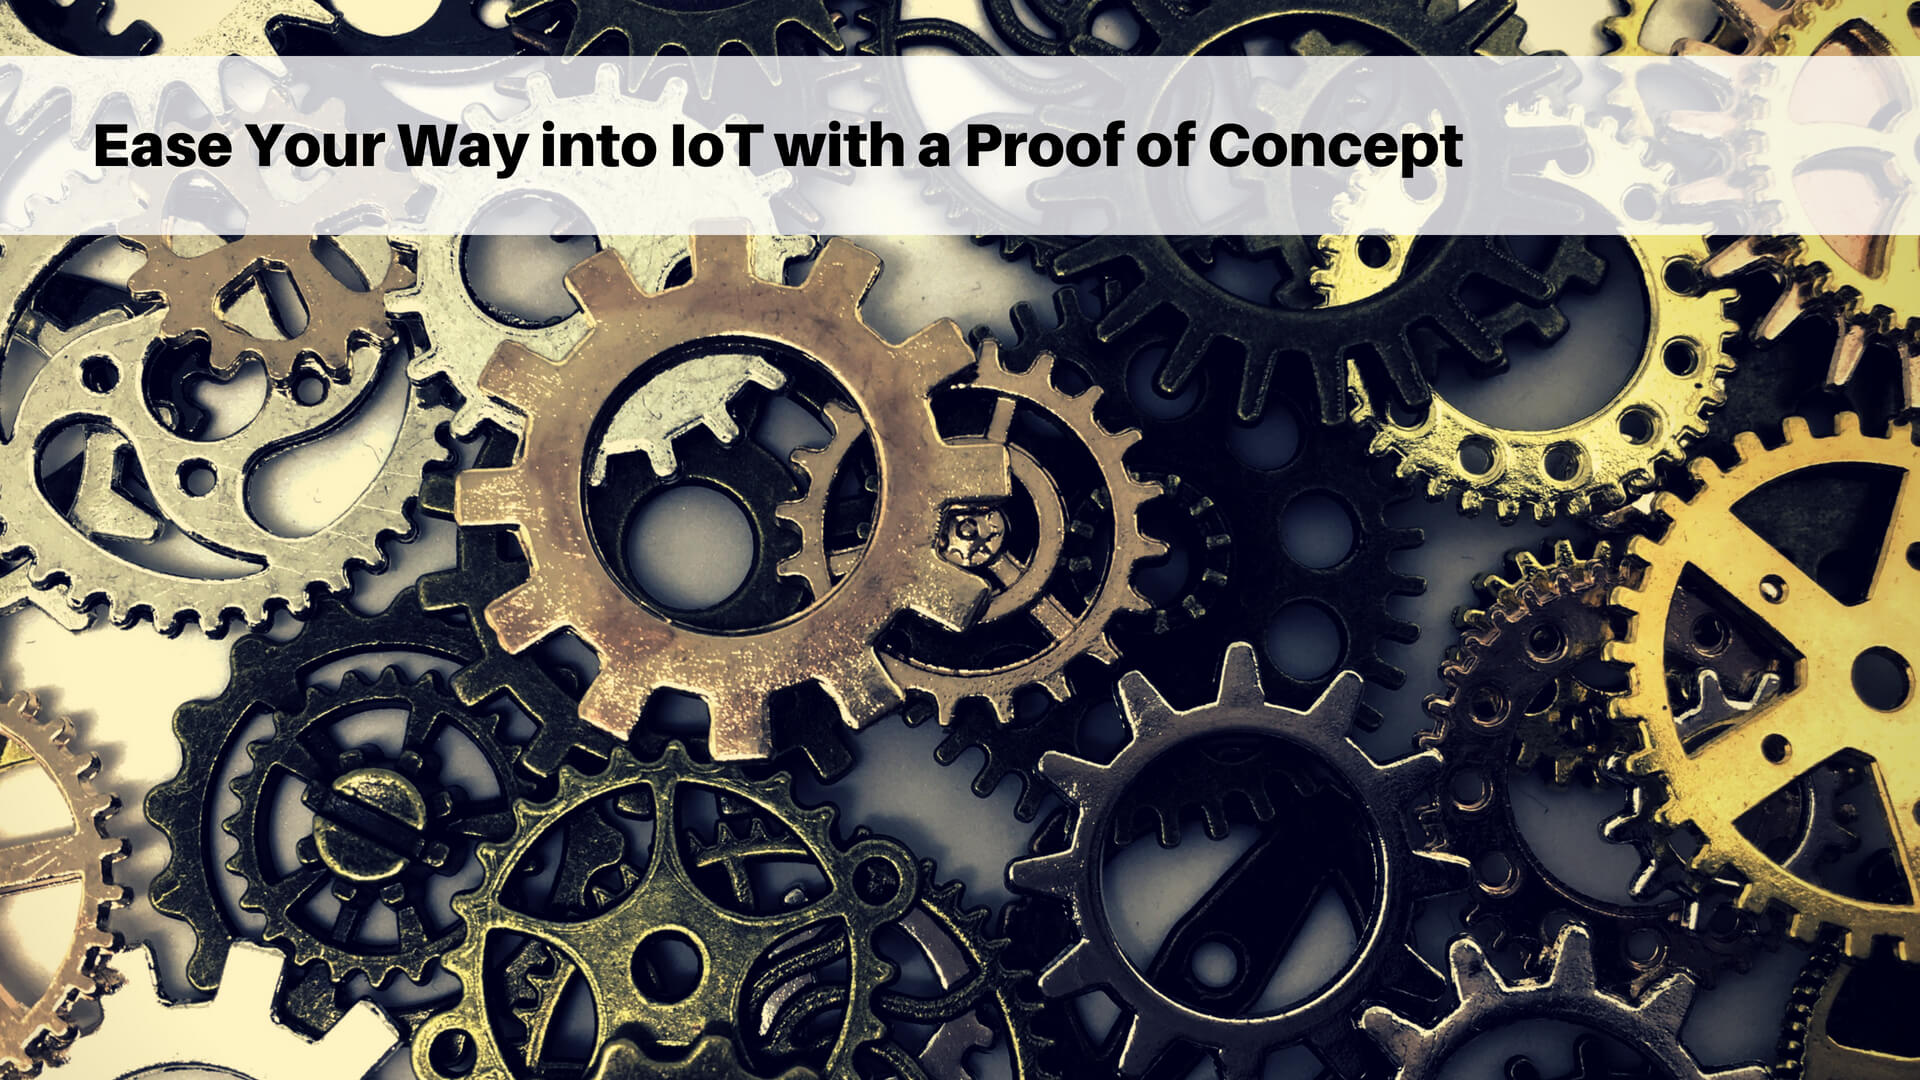 Ease Your Way into IoT with a Proof of Concept